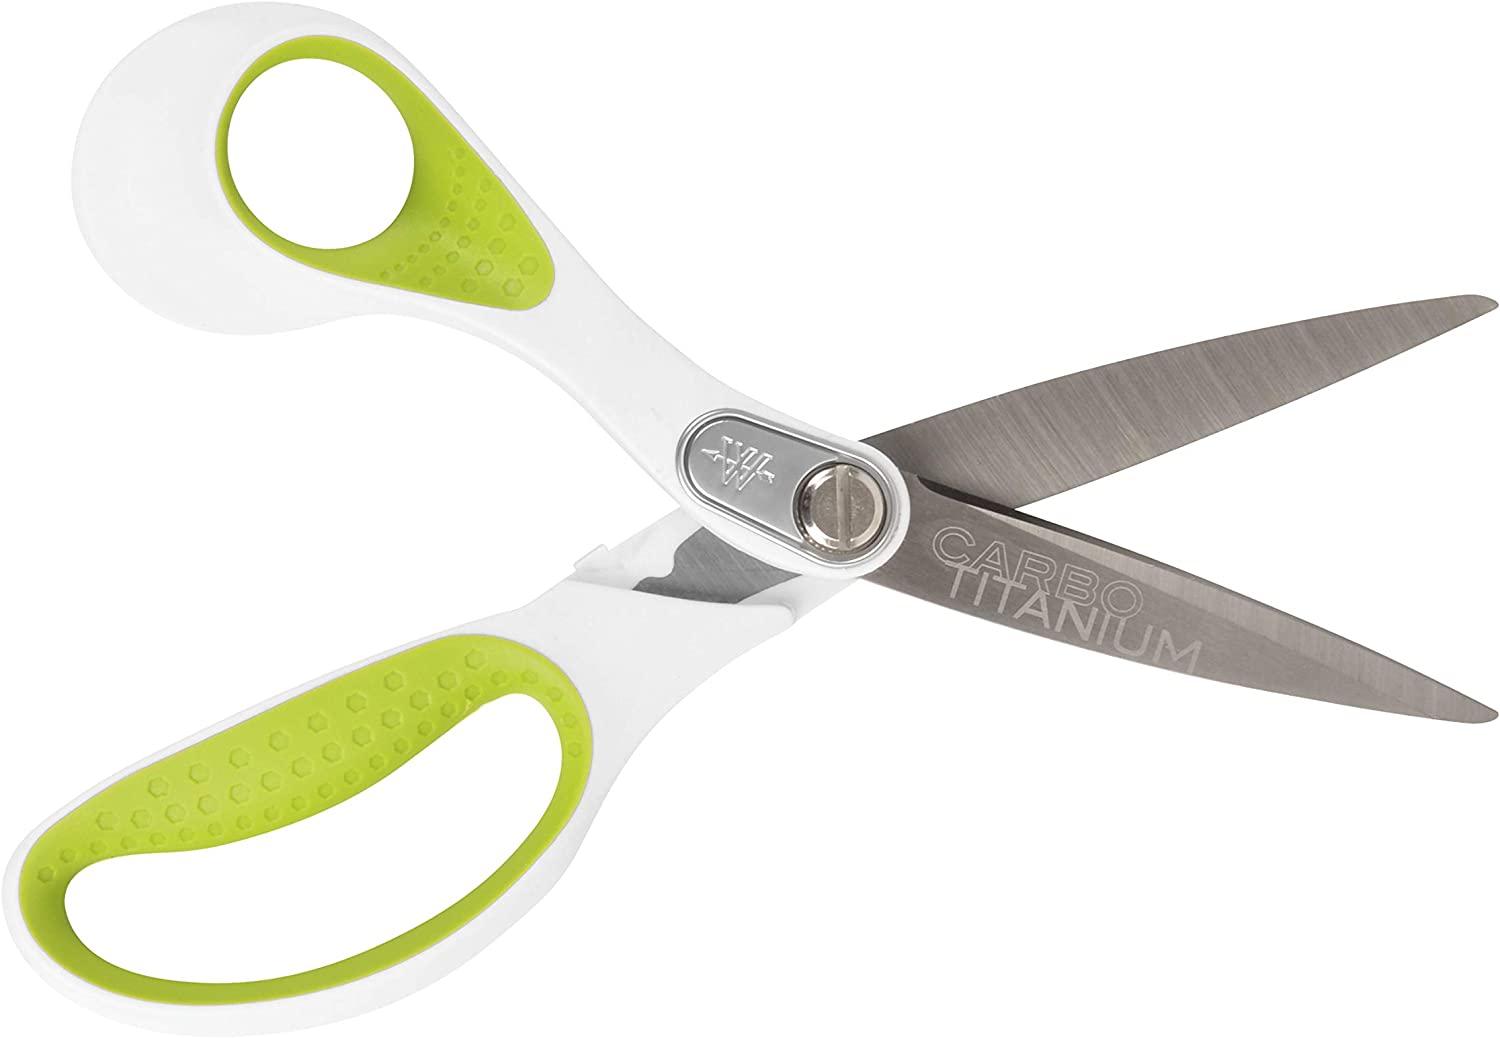  Left Handed Scissors for Adults, 8 Inch Lefty Scissors